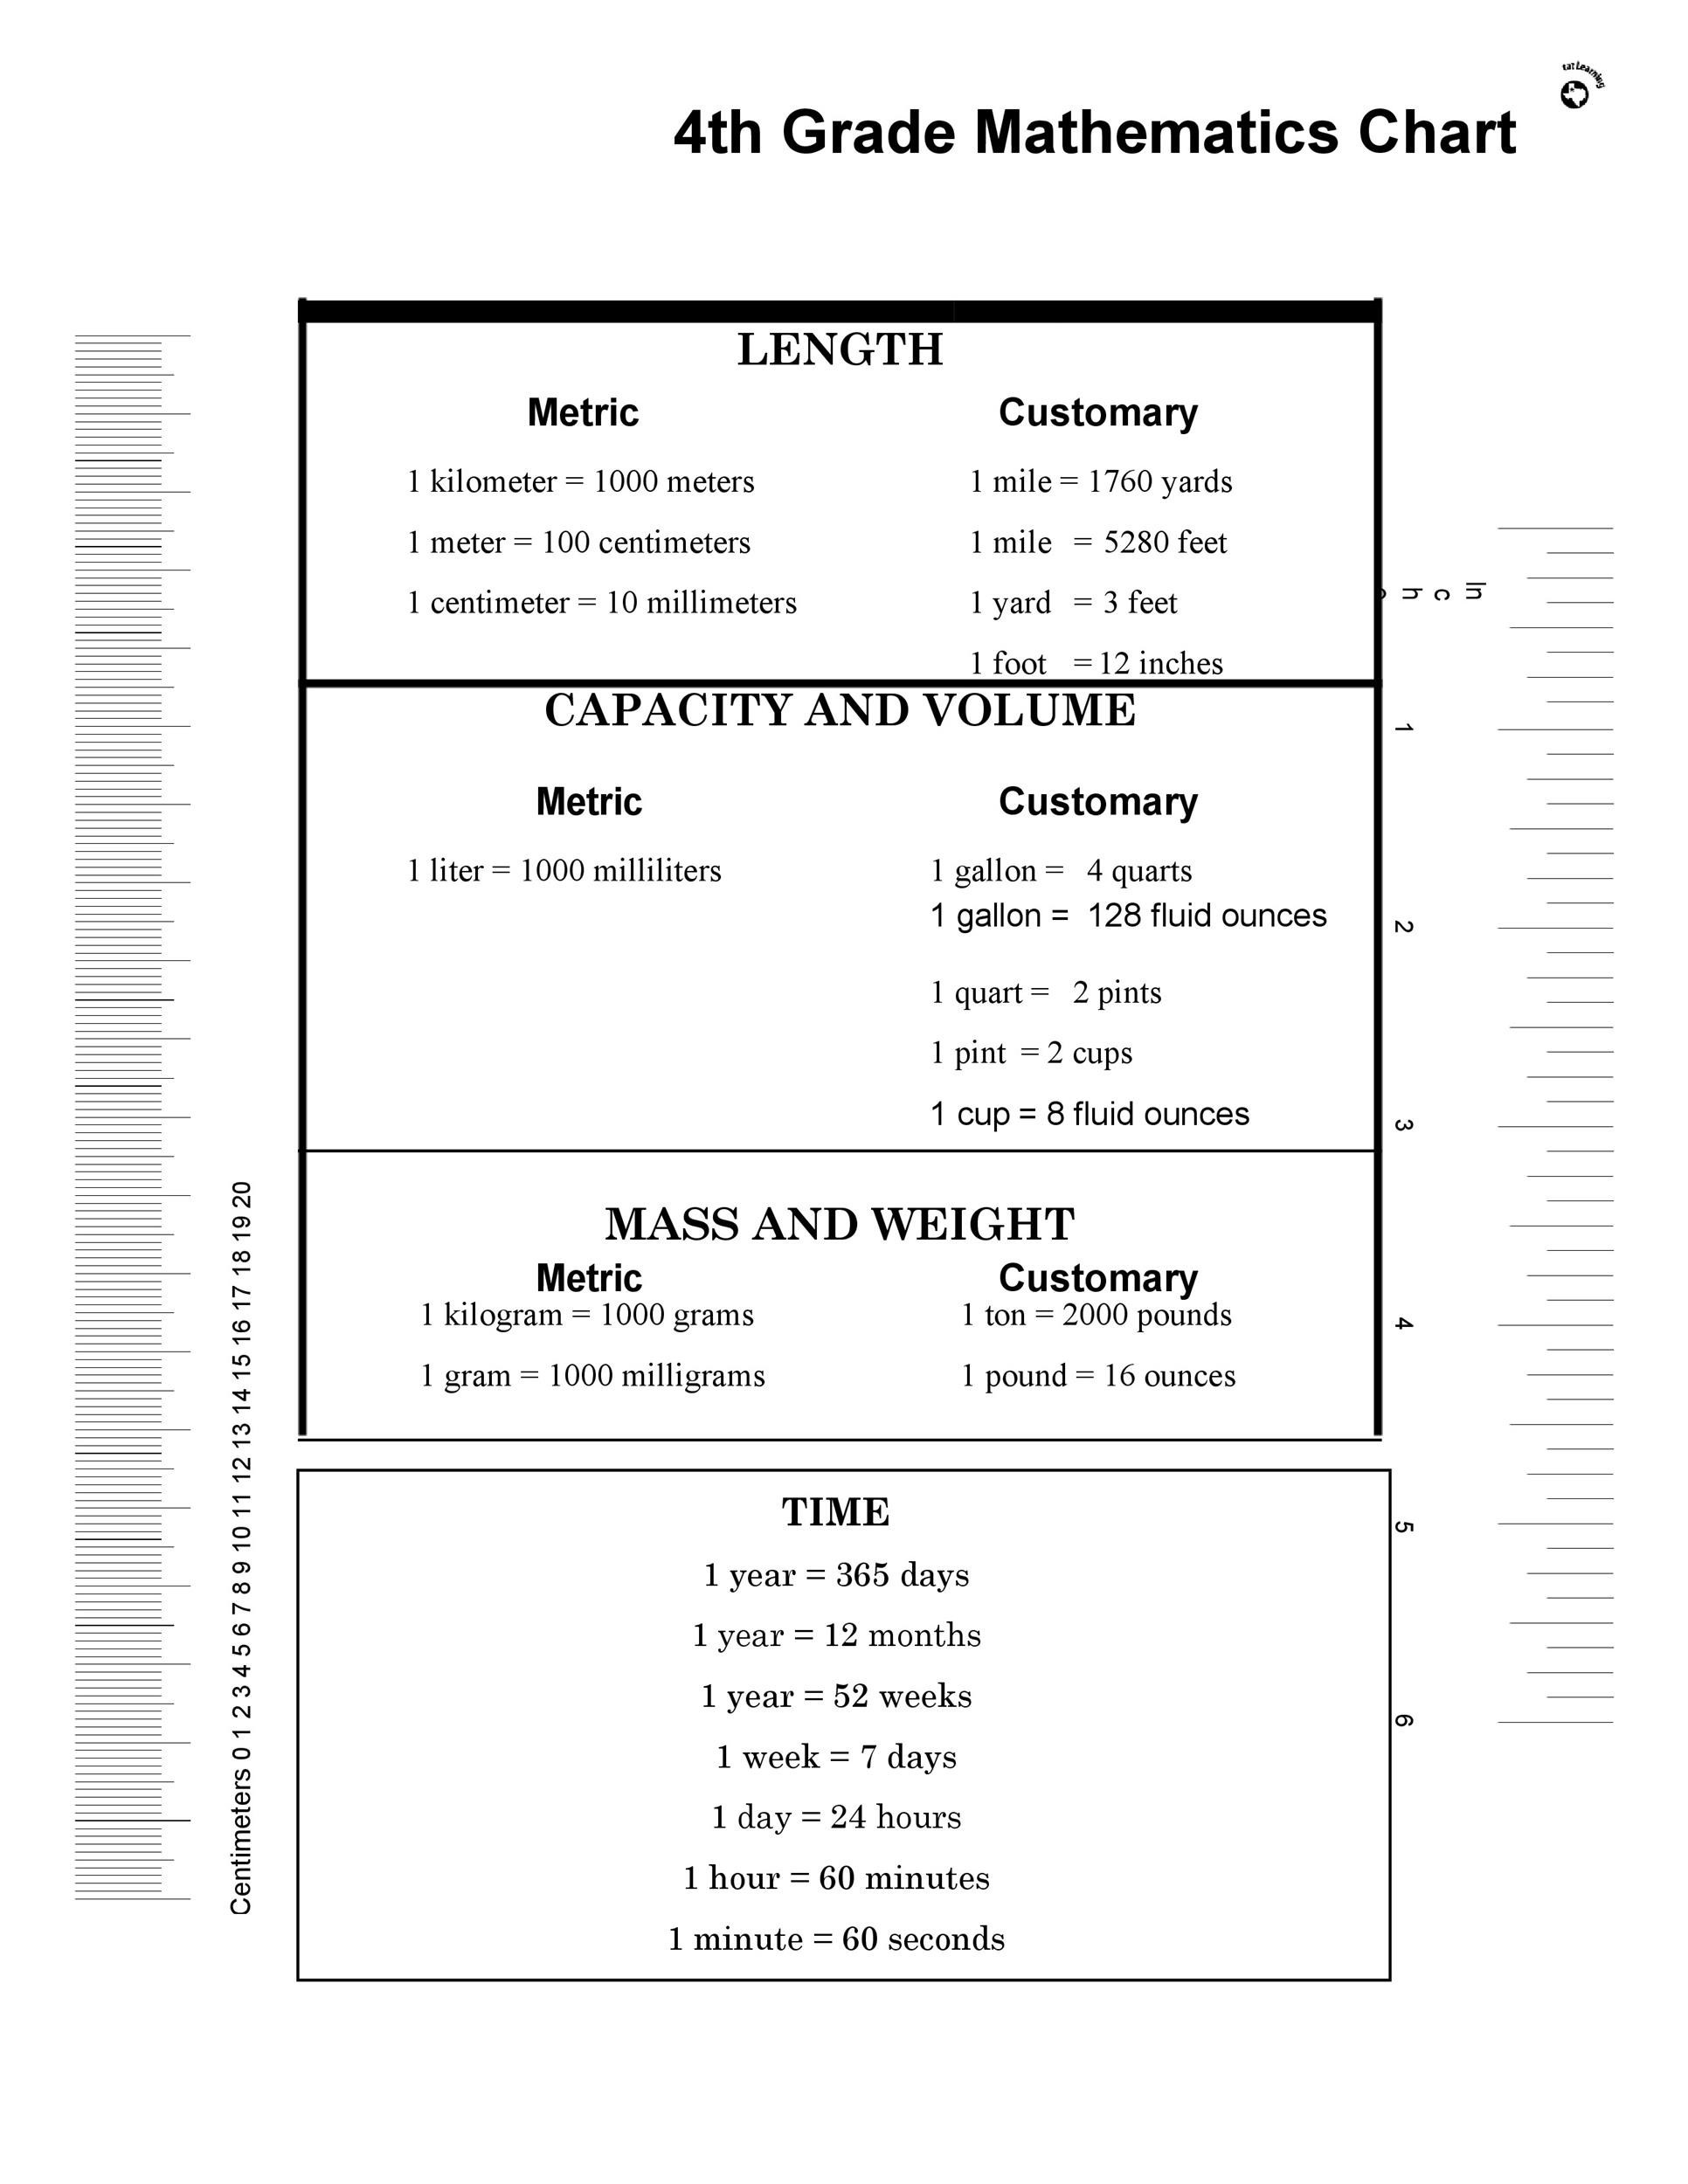 Metric Weights And Measures Chart